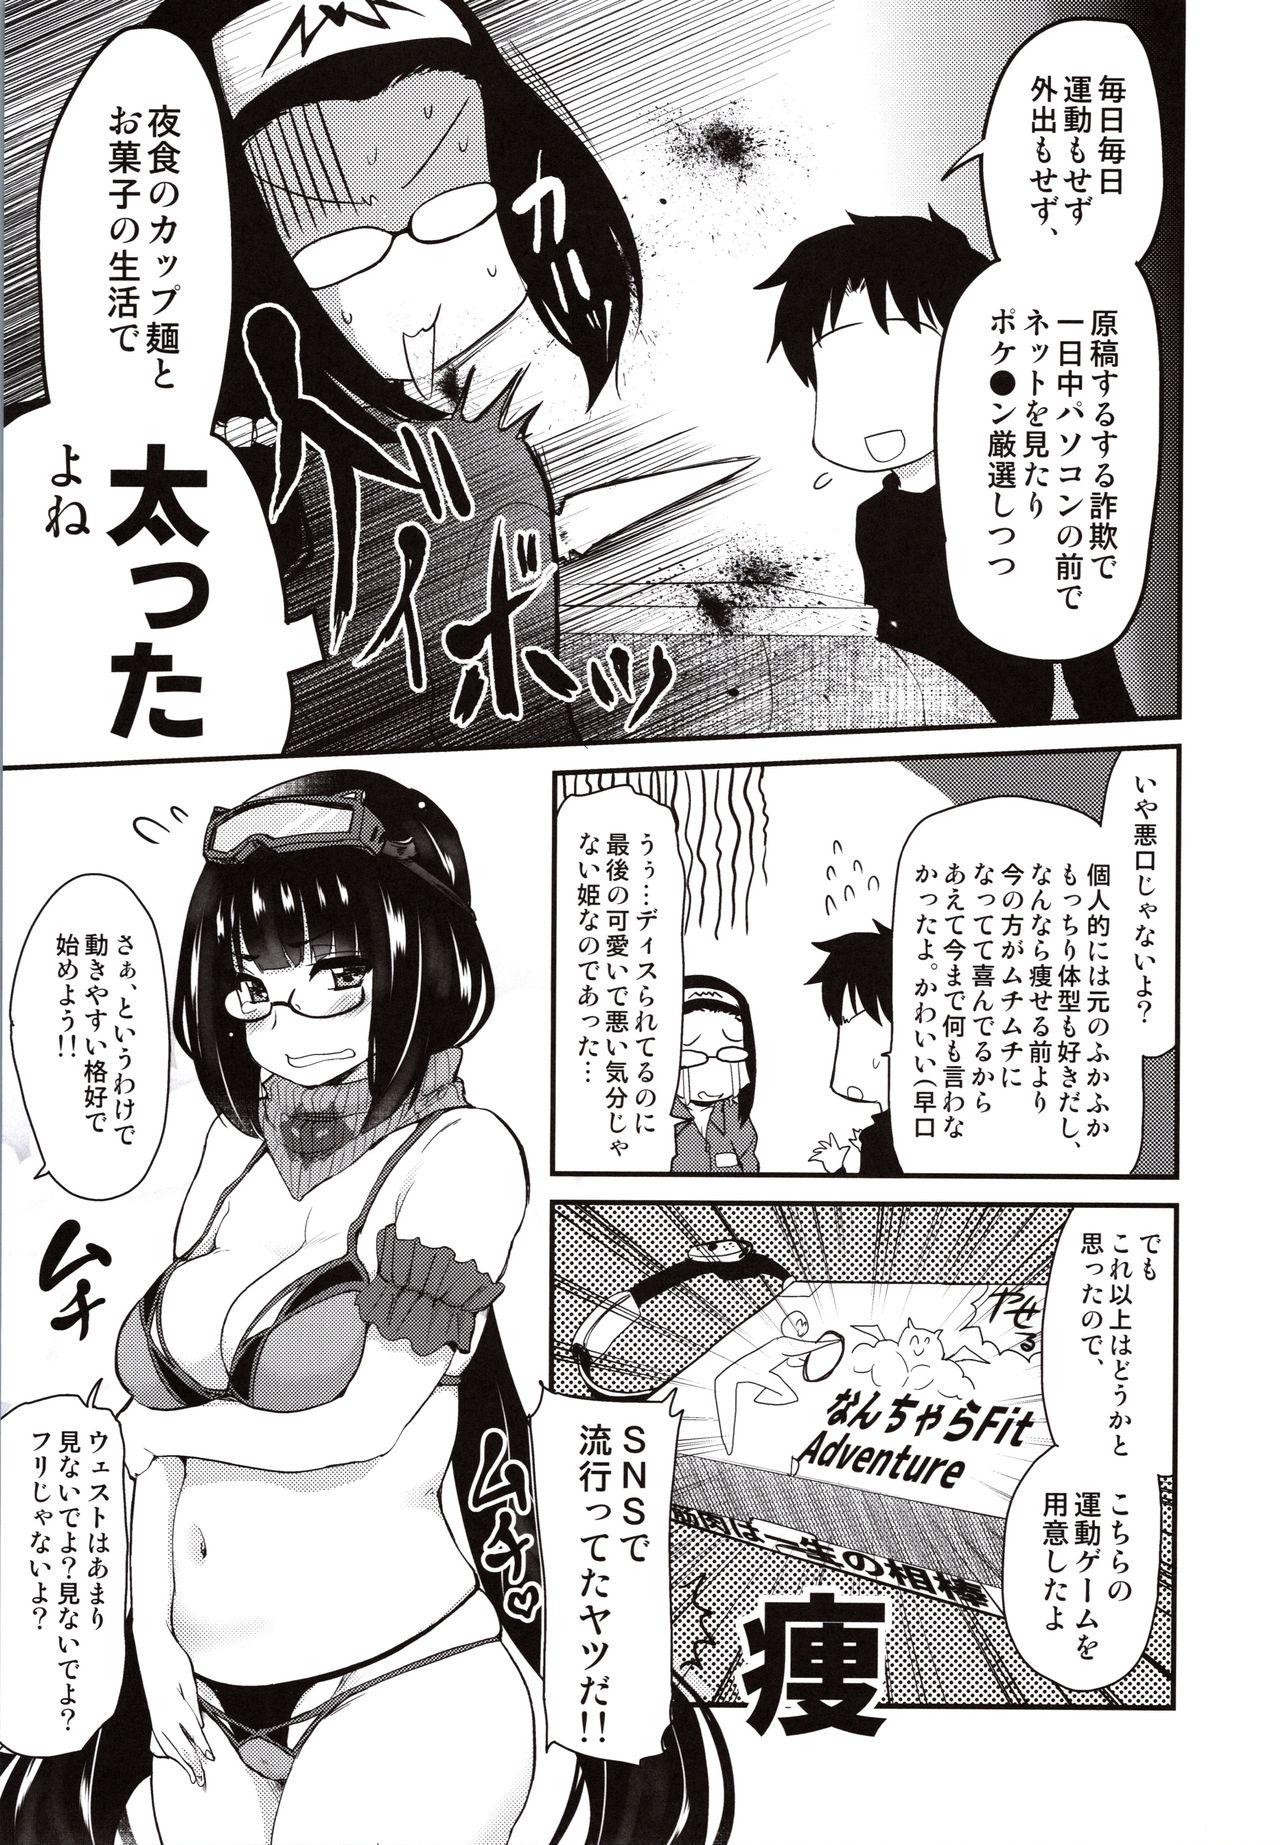 Tight Pussy Otakuhime to Ichaicha Furo - Fate grand order Weird - Page 4